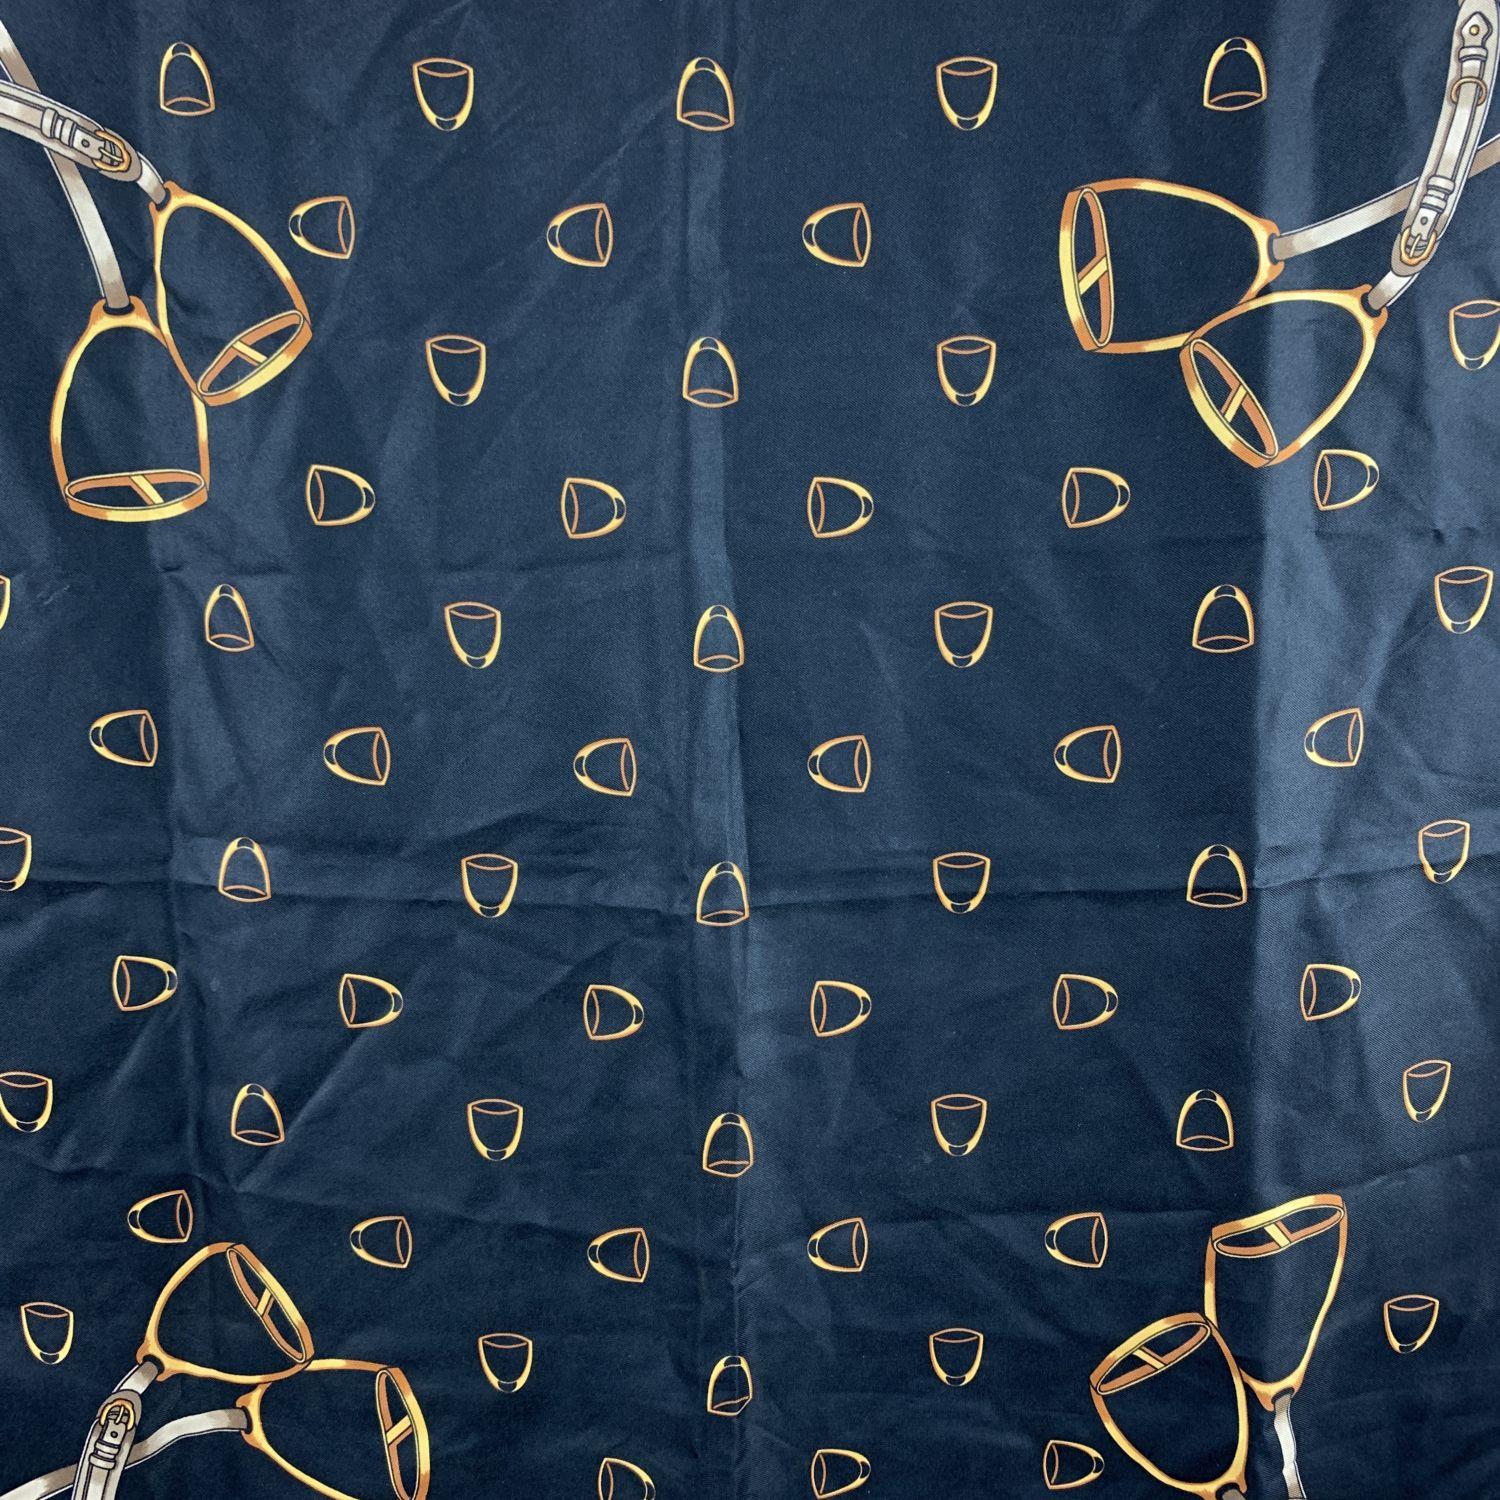 Vintage GUCCI silk scarf with equestrian-themed print. Main colors are brown and yellow. 100% silk. Composition tag is still attached, Approx. measurements 26.5 x 27.5 inches - 67.5 X 70 cm.



Details

MATERIAL: Silk

COLOR: Brown

MODEL: